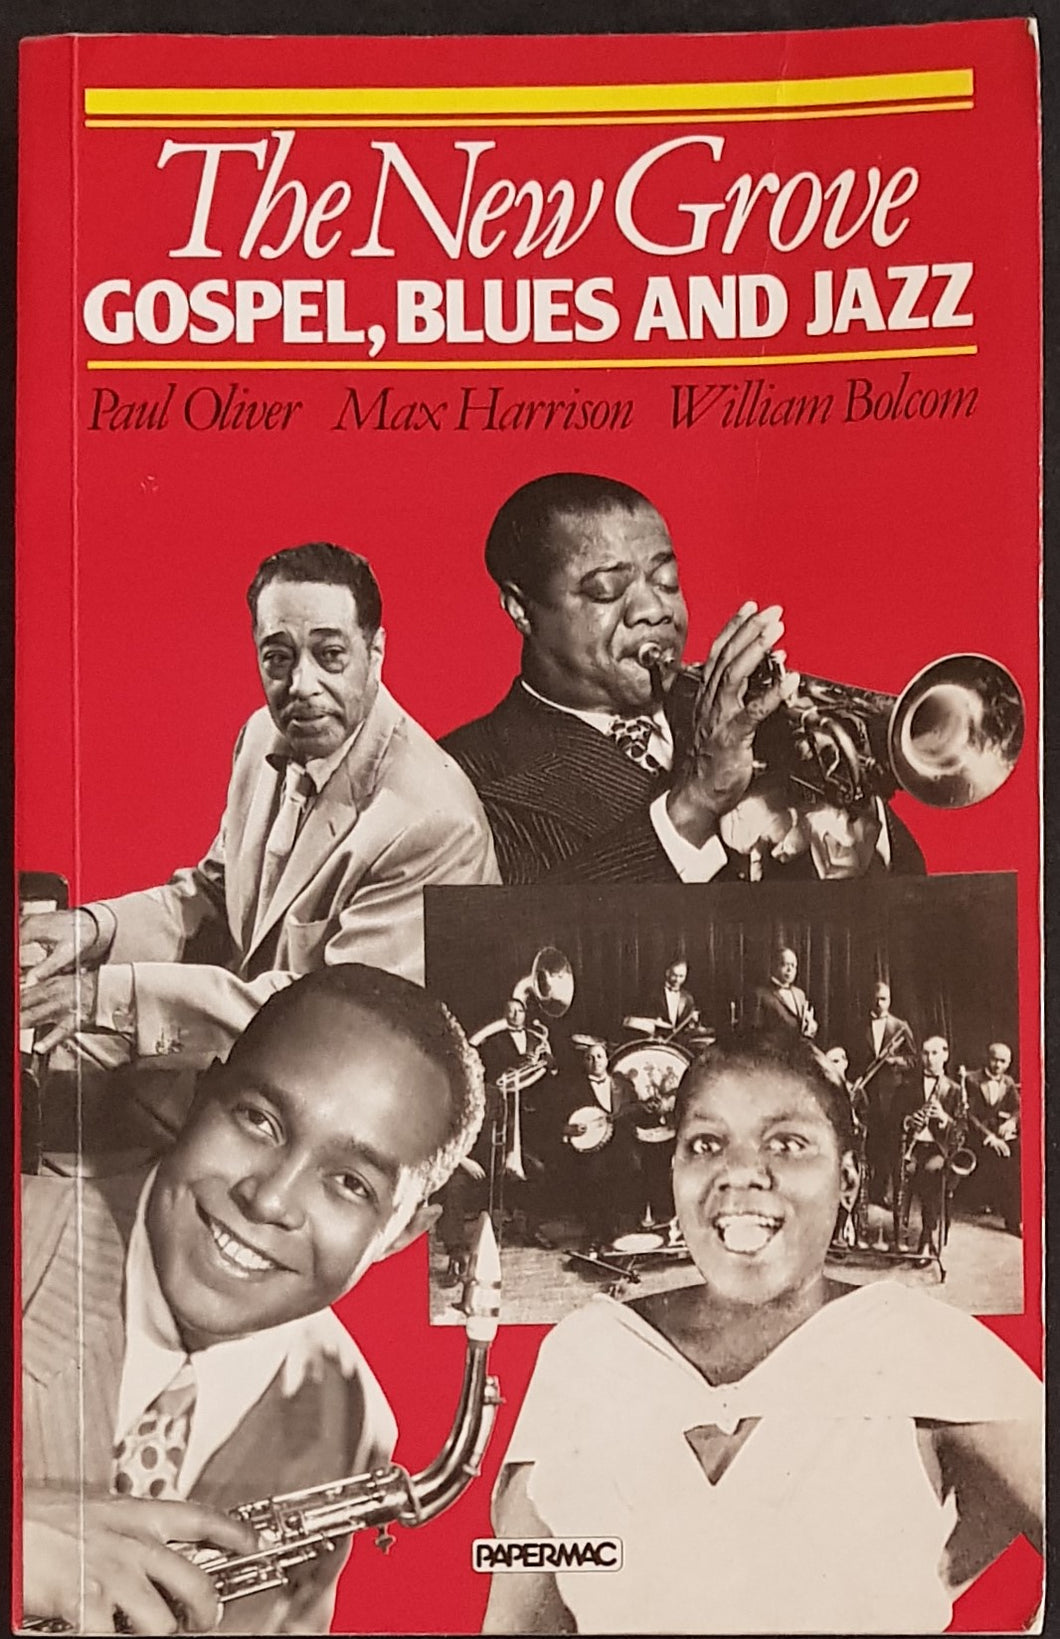 V/A - The New Grove - Gospel, Blues And Jazz